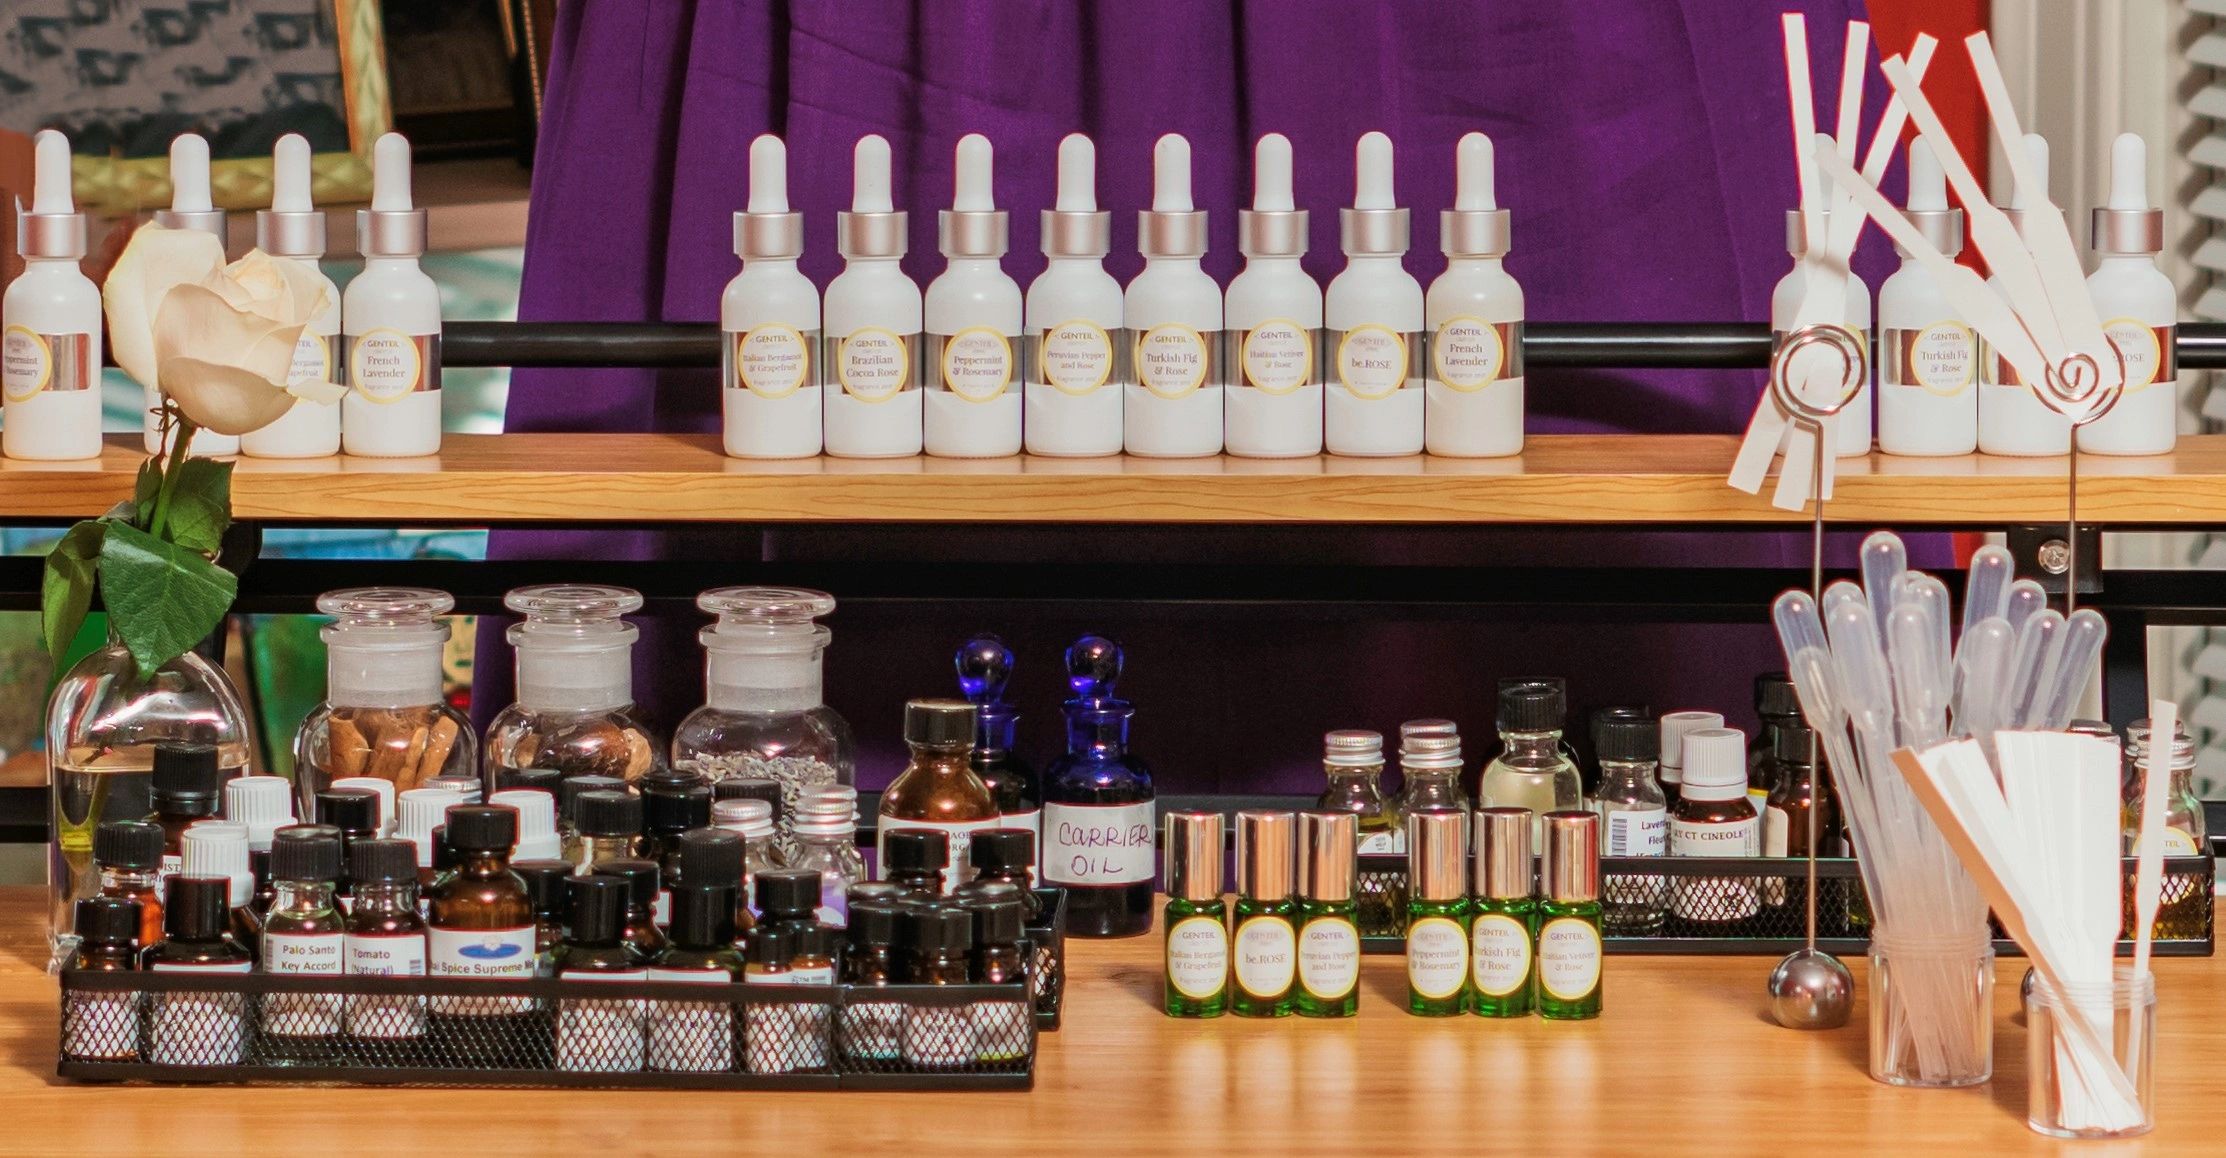 Close up photo of Terees Western's perfumer's organ. White lab bottles on top shelf.